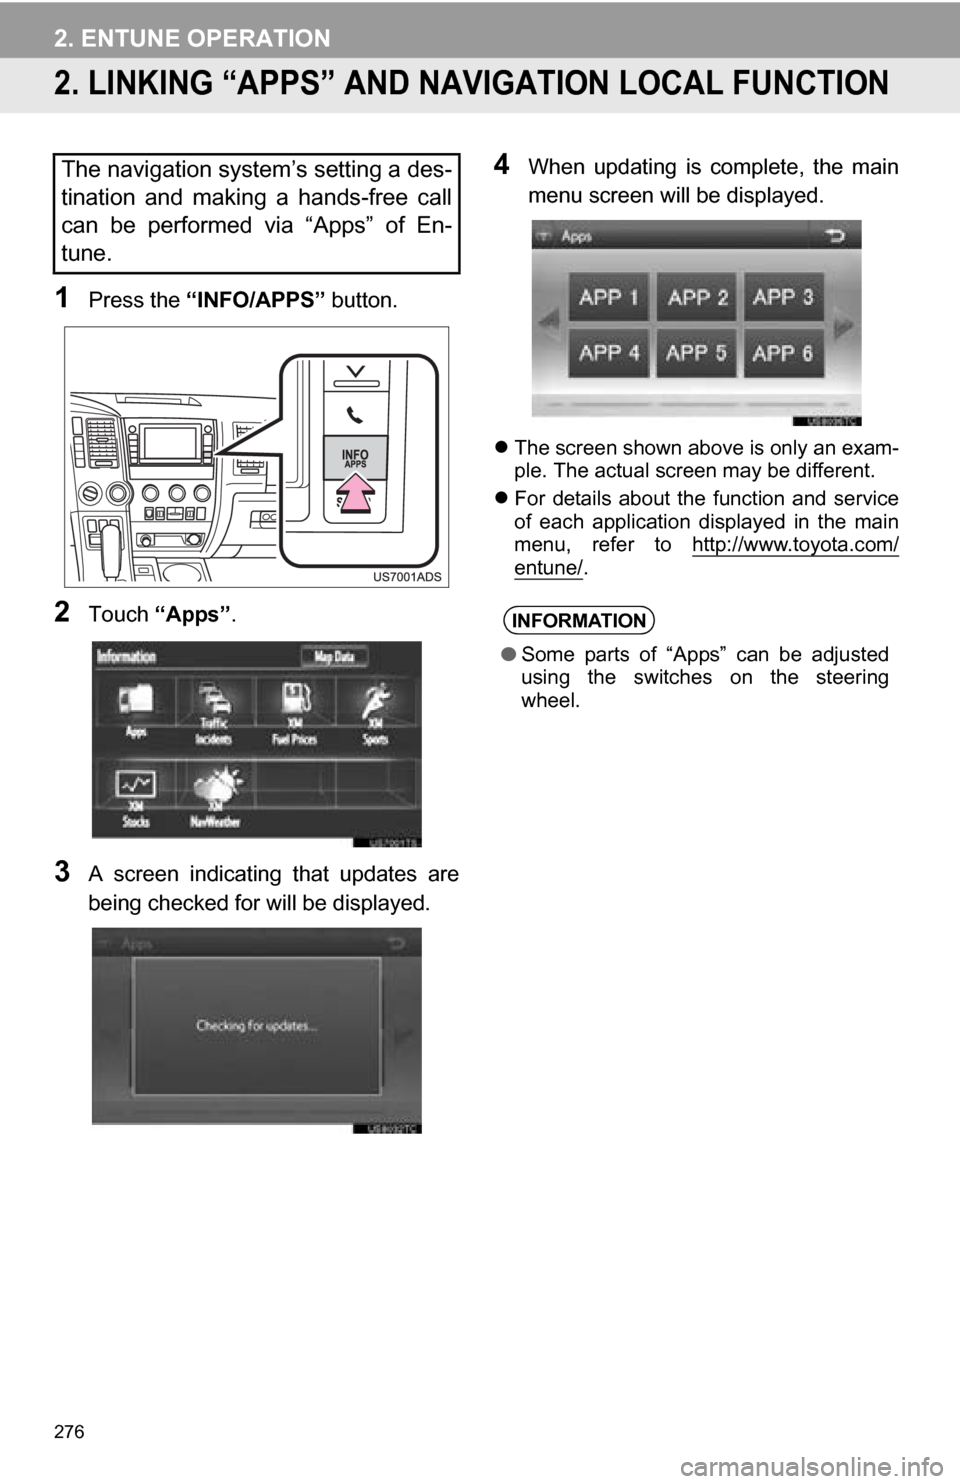 TOYOTA SEQUOIA 2013 2.G Navigation Manual 276
2. ENTUNE OPERATION
2. LINKING “APPS” AND NAVIGATION LOCAL FUNCTION
1Press the “INFO/APPS” button.
2Touch “Apps” .
3A  screen  indicating  that  updates  are
being checked for will be 